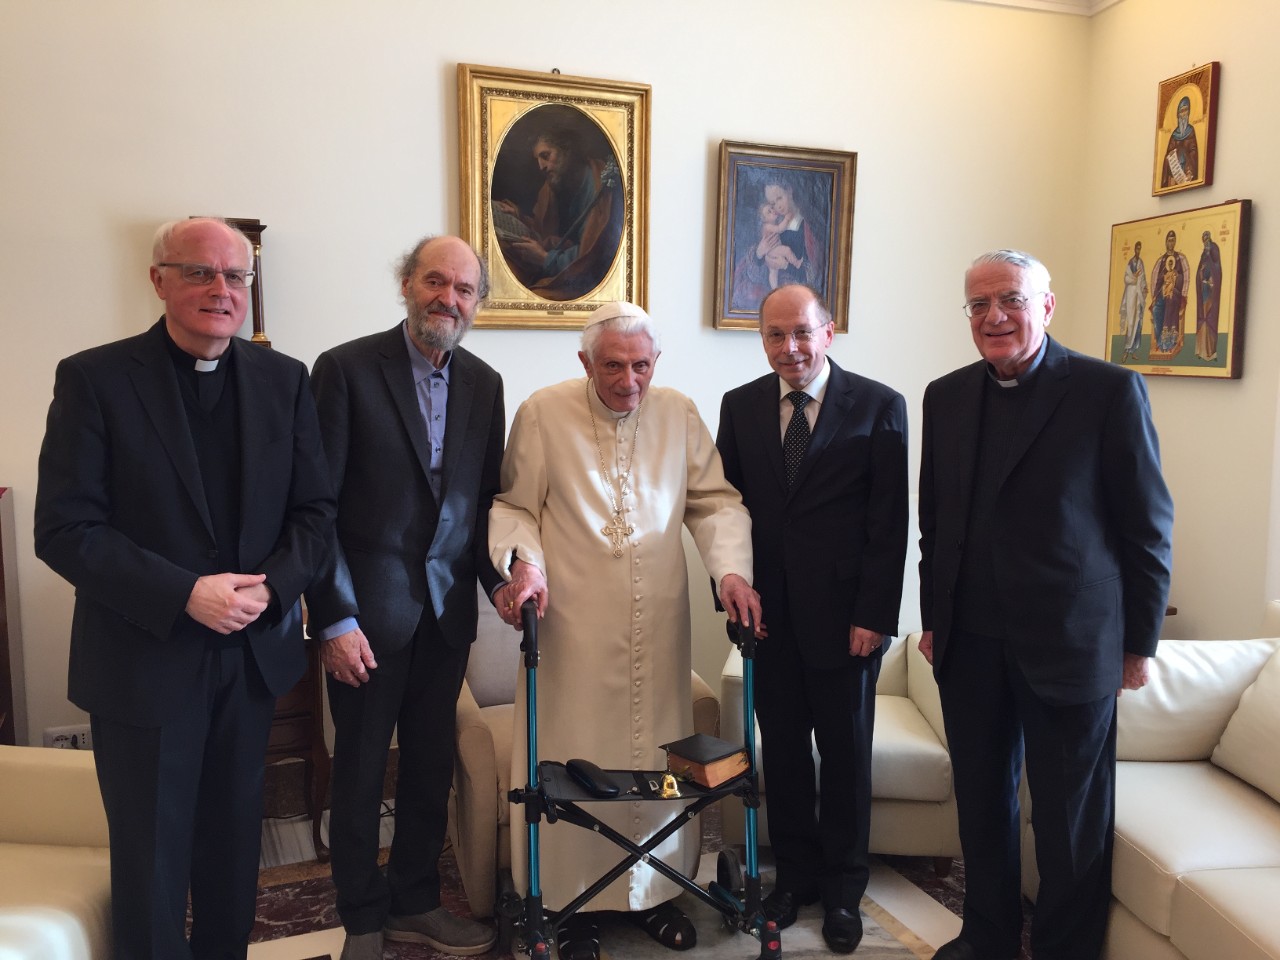 BENEDICT XVI RECEIVES THE WINNERS OF THE RATZINGER PRIZE 2017